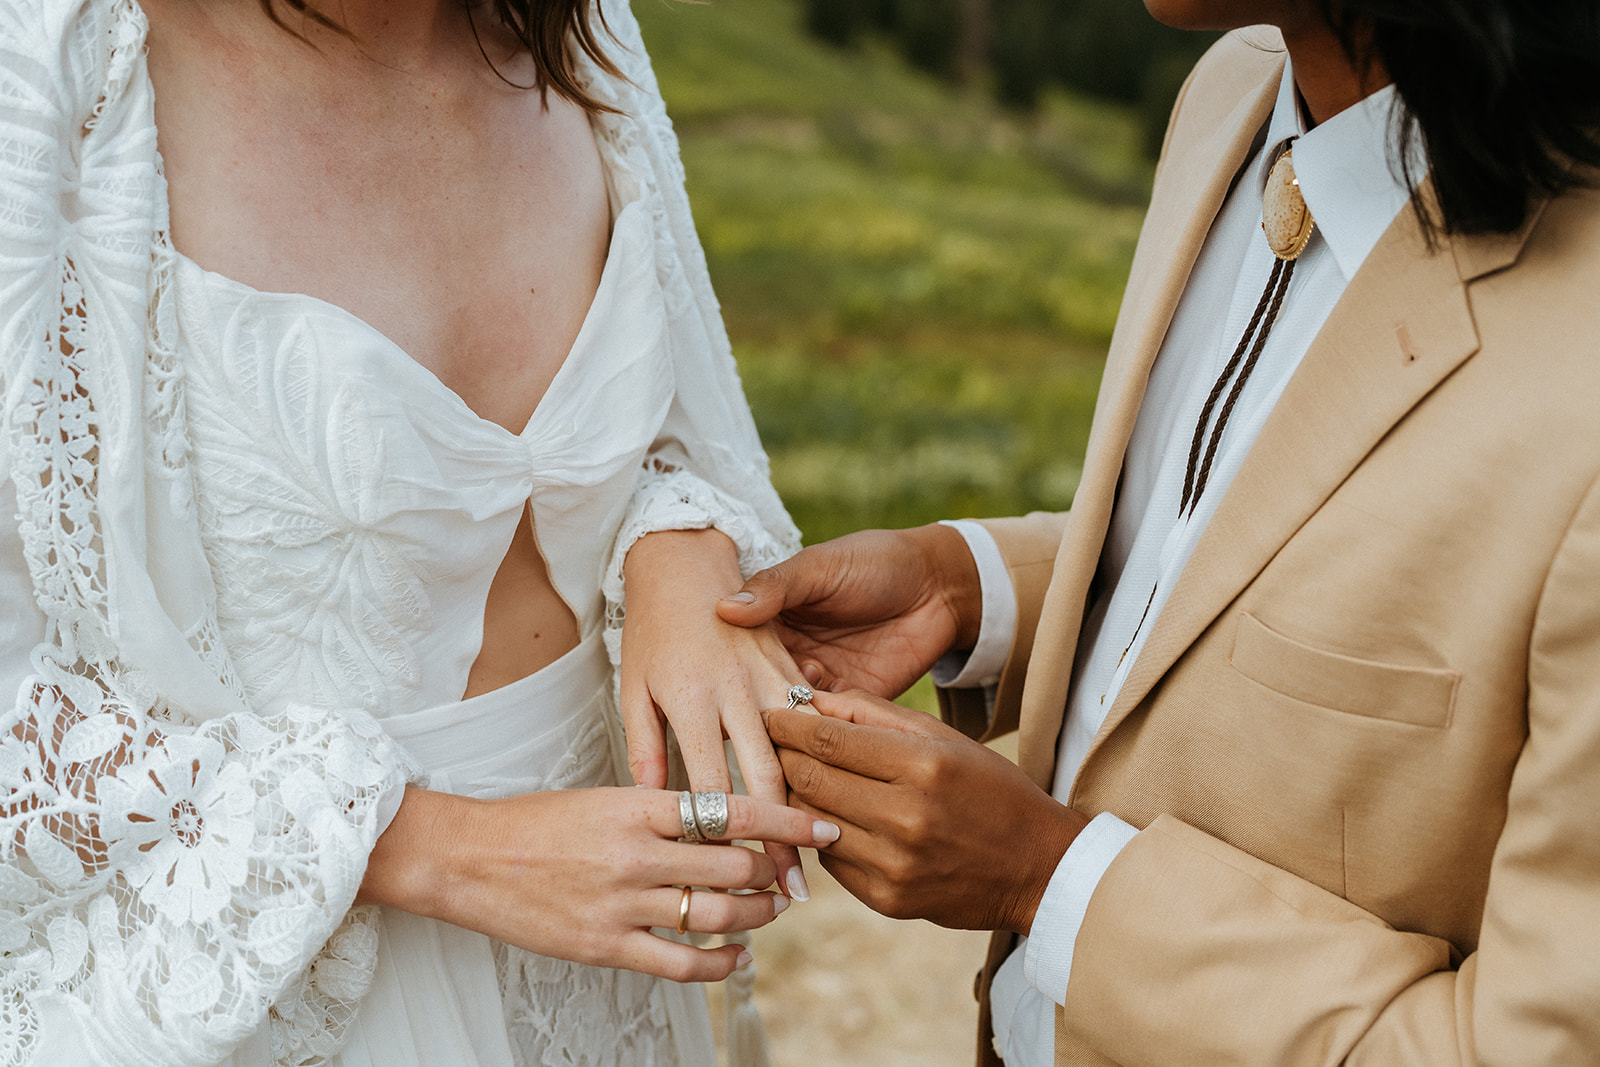 A groom in a tan suit and gold bolo tie puts the ring on his bride's finger